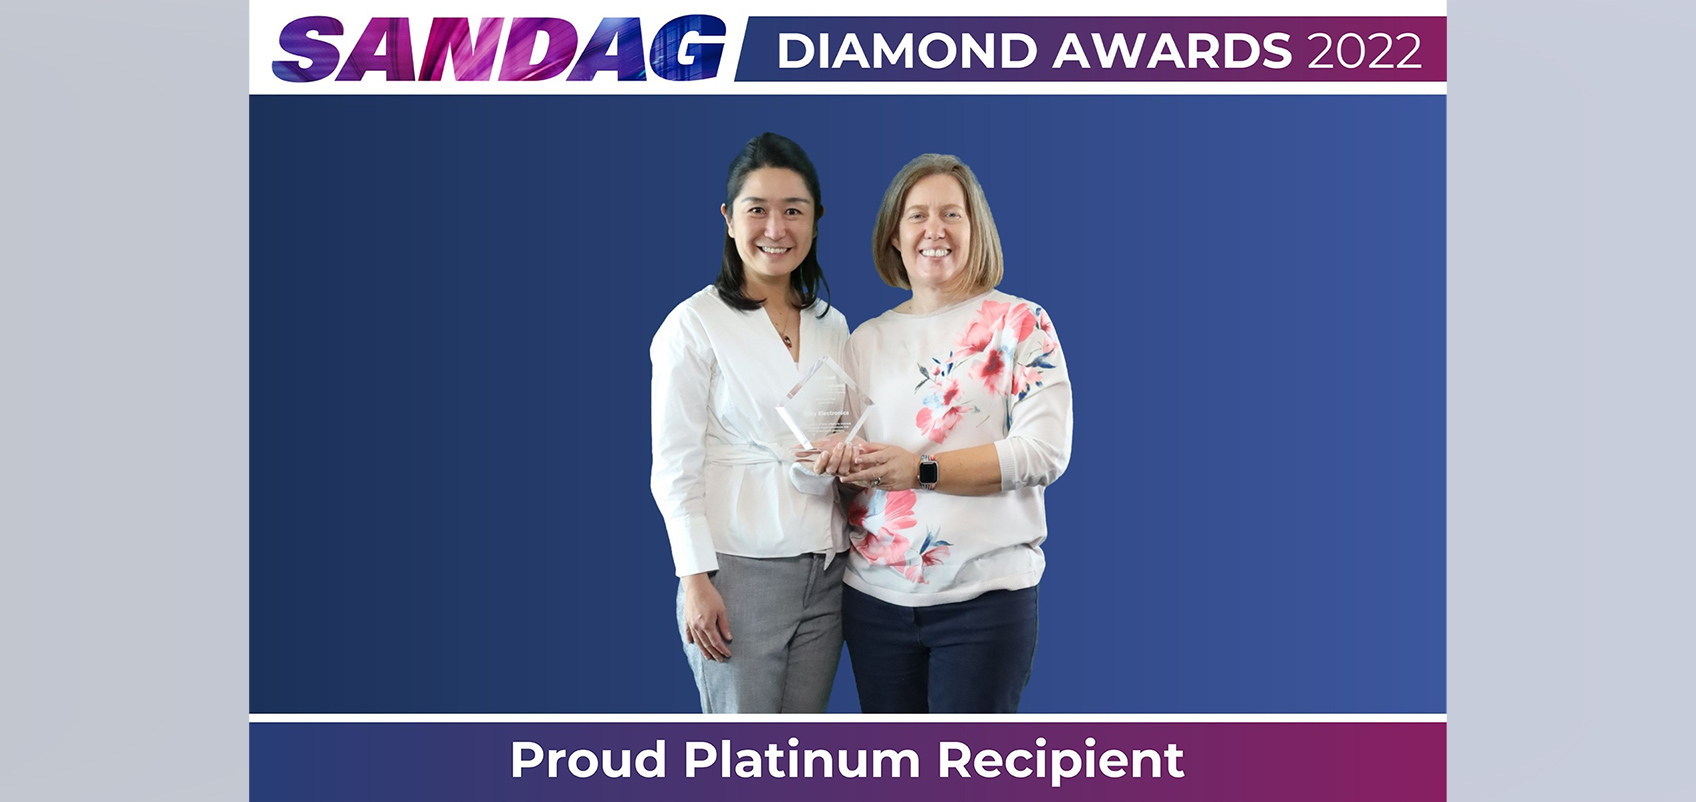 Two employees are holding trophies with "Proud Platinum Recipient" written within the photo